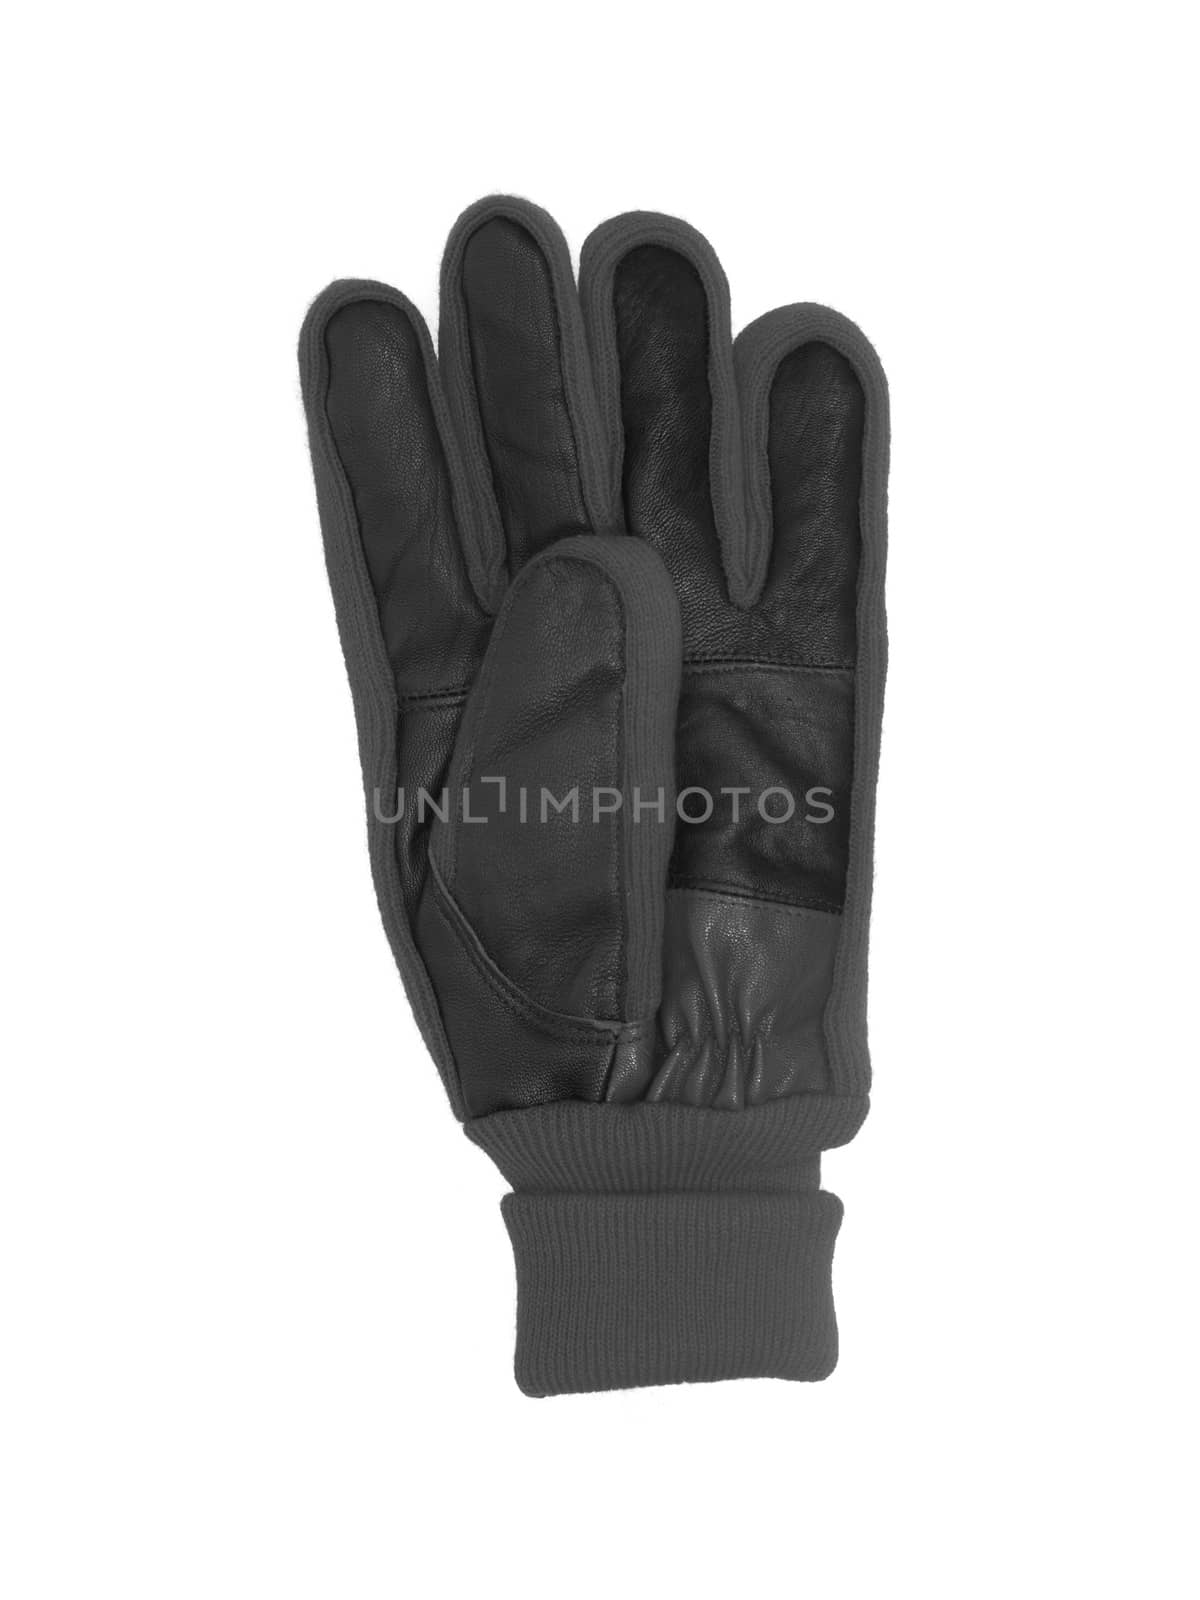 Winter gloves isolated against a white background